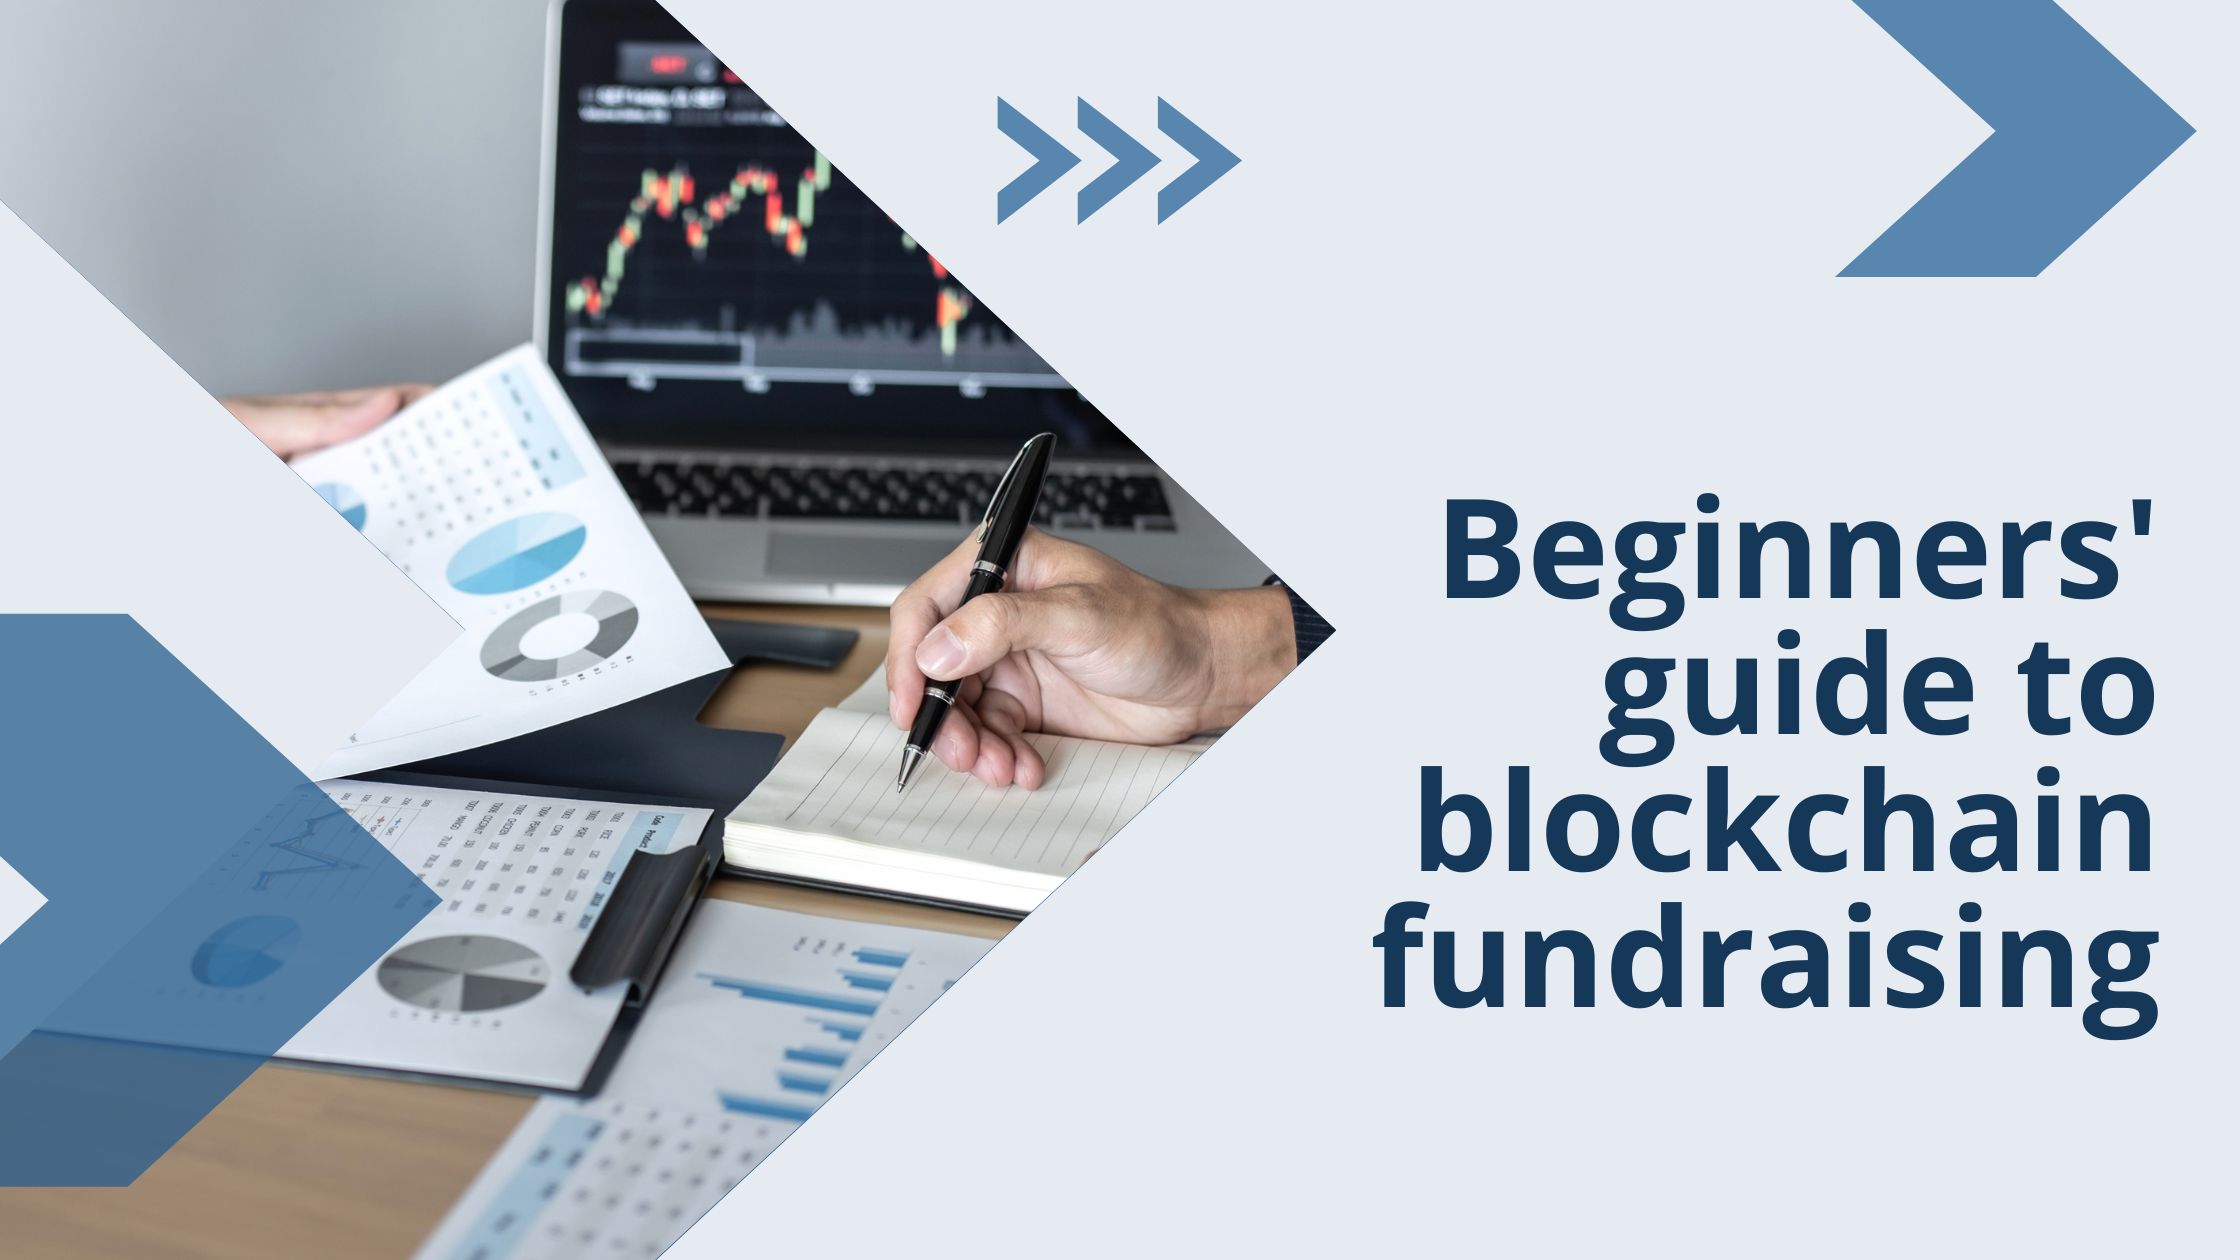 Beginners' guide to blockchain fundraising